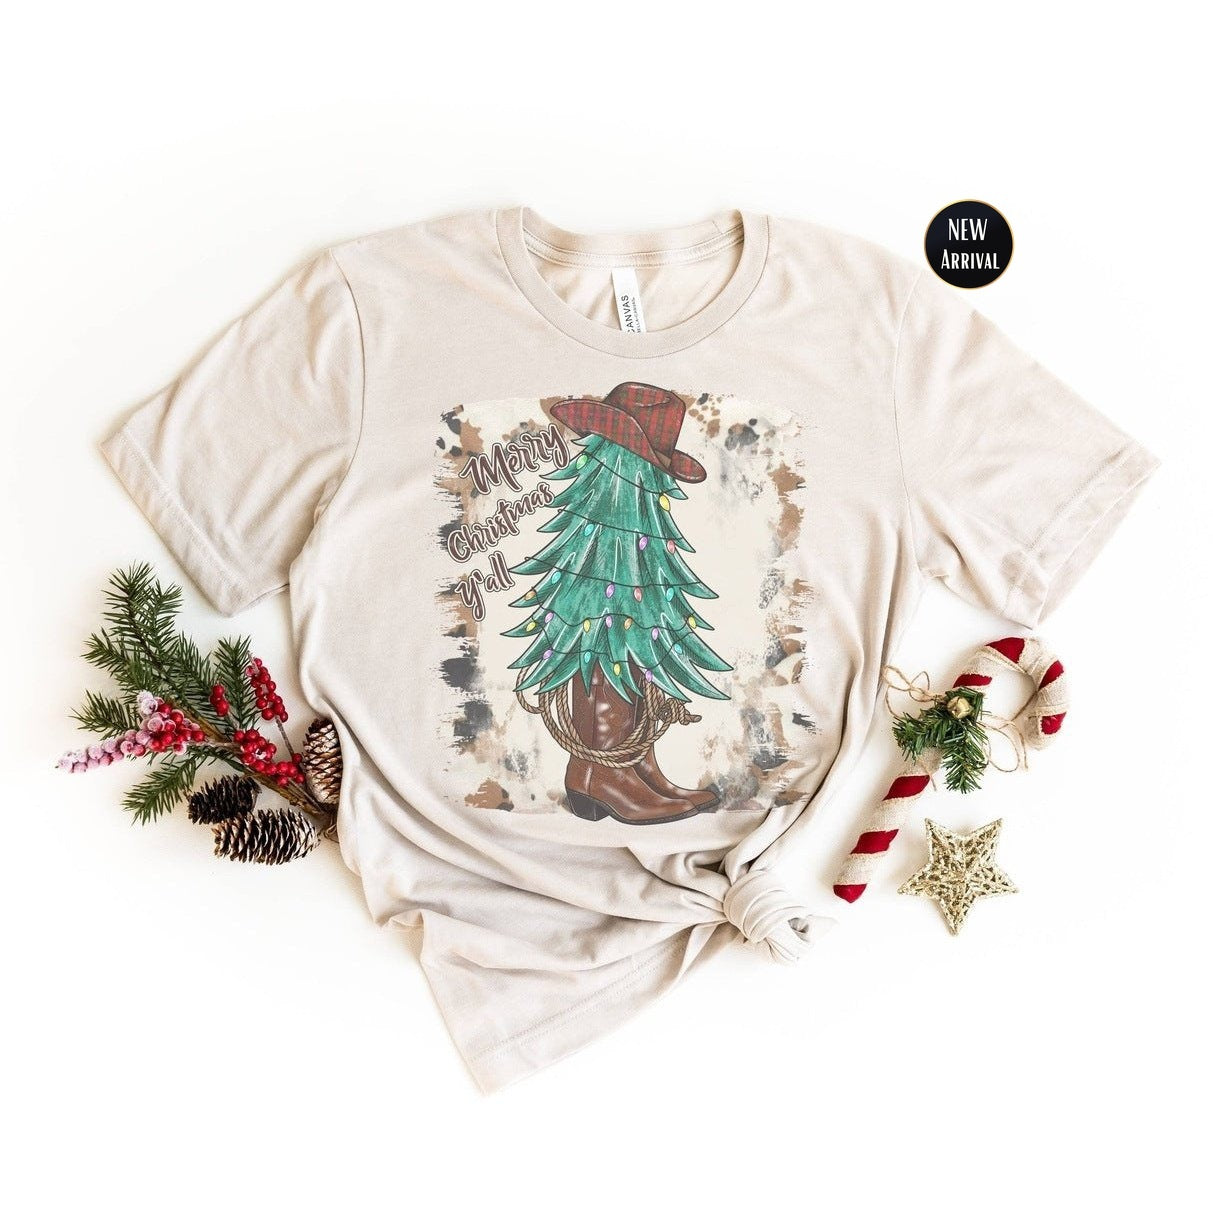 Cowboy Christmas Tree Western Graphic Tee Holiday